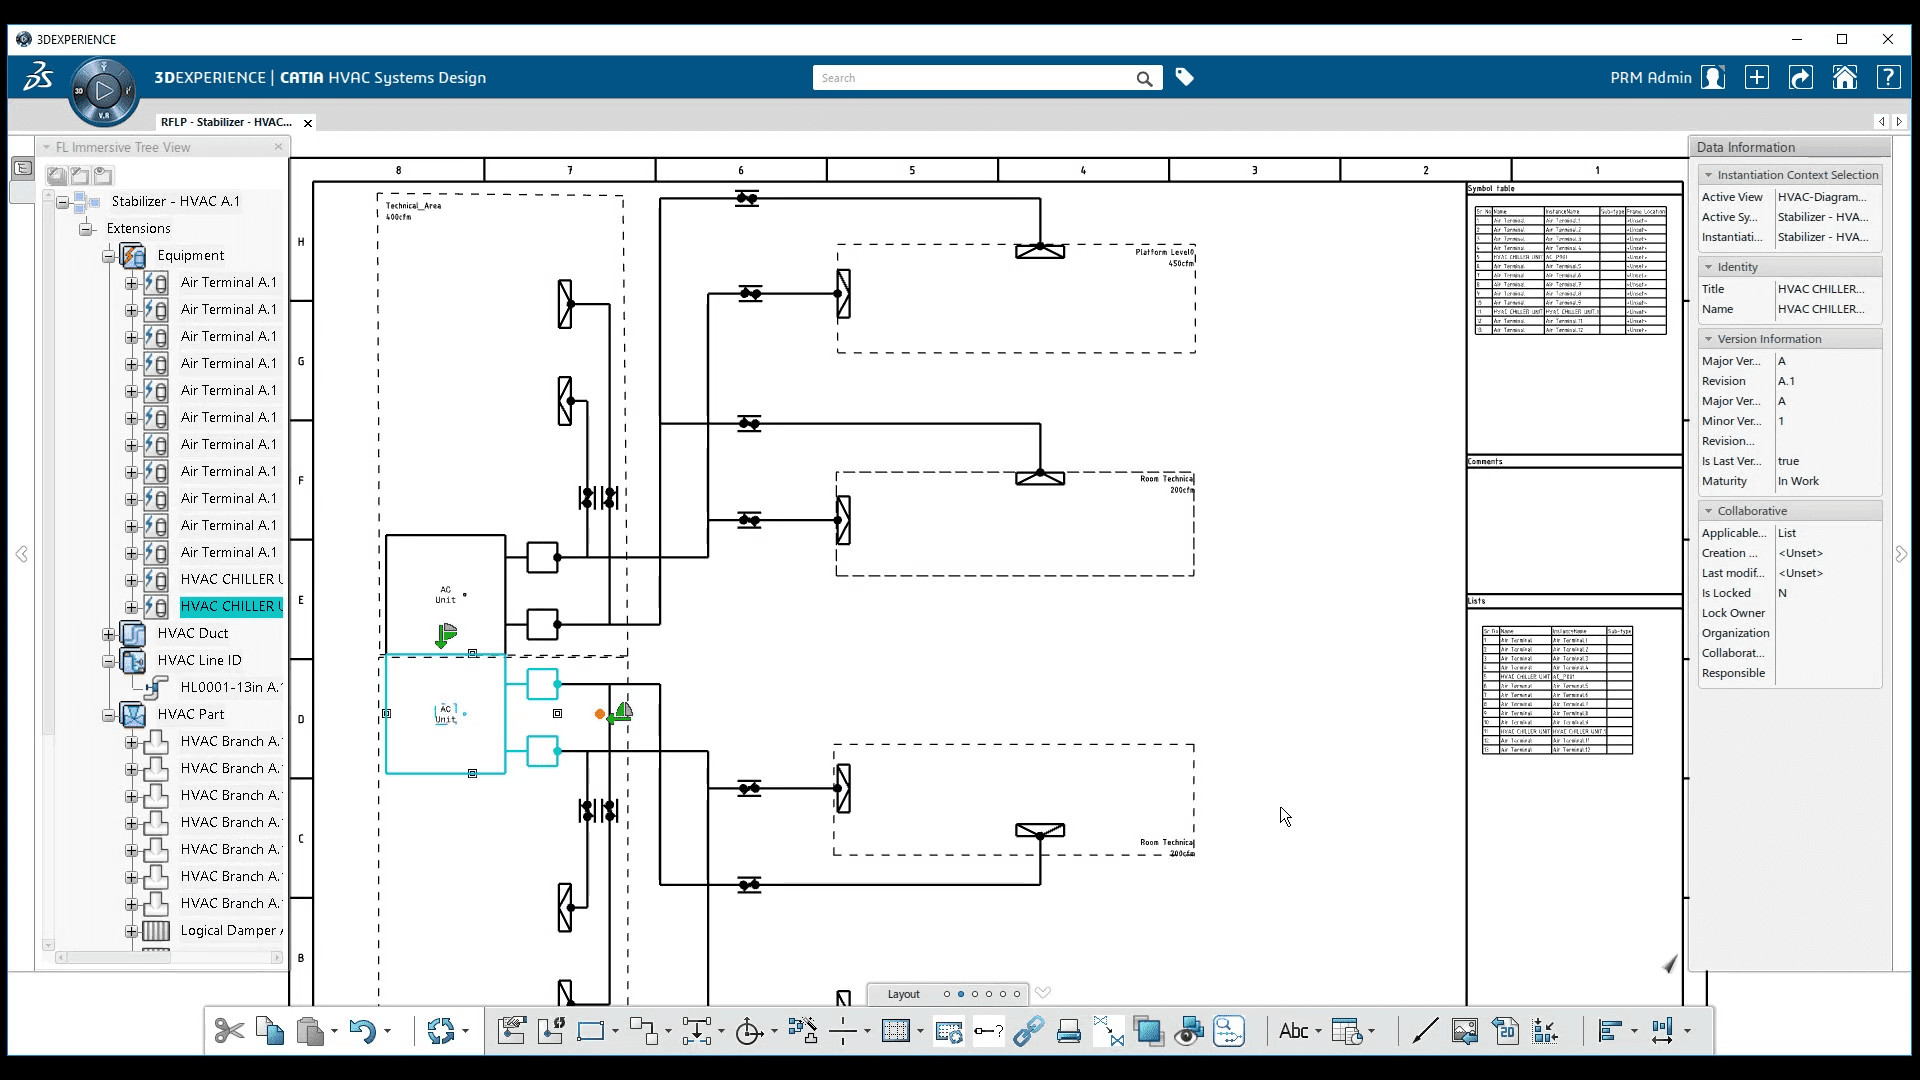 Building And Civil Systems Schematic Designer (BCSHC)